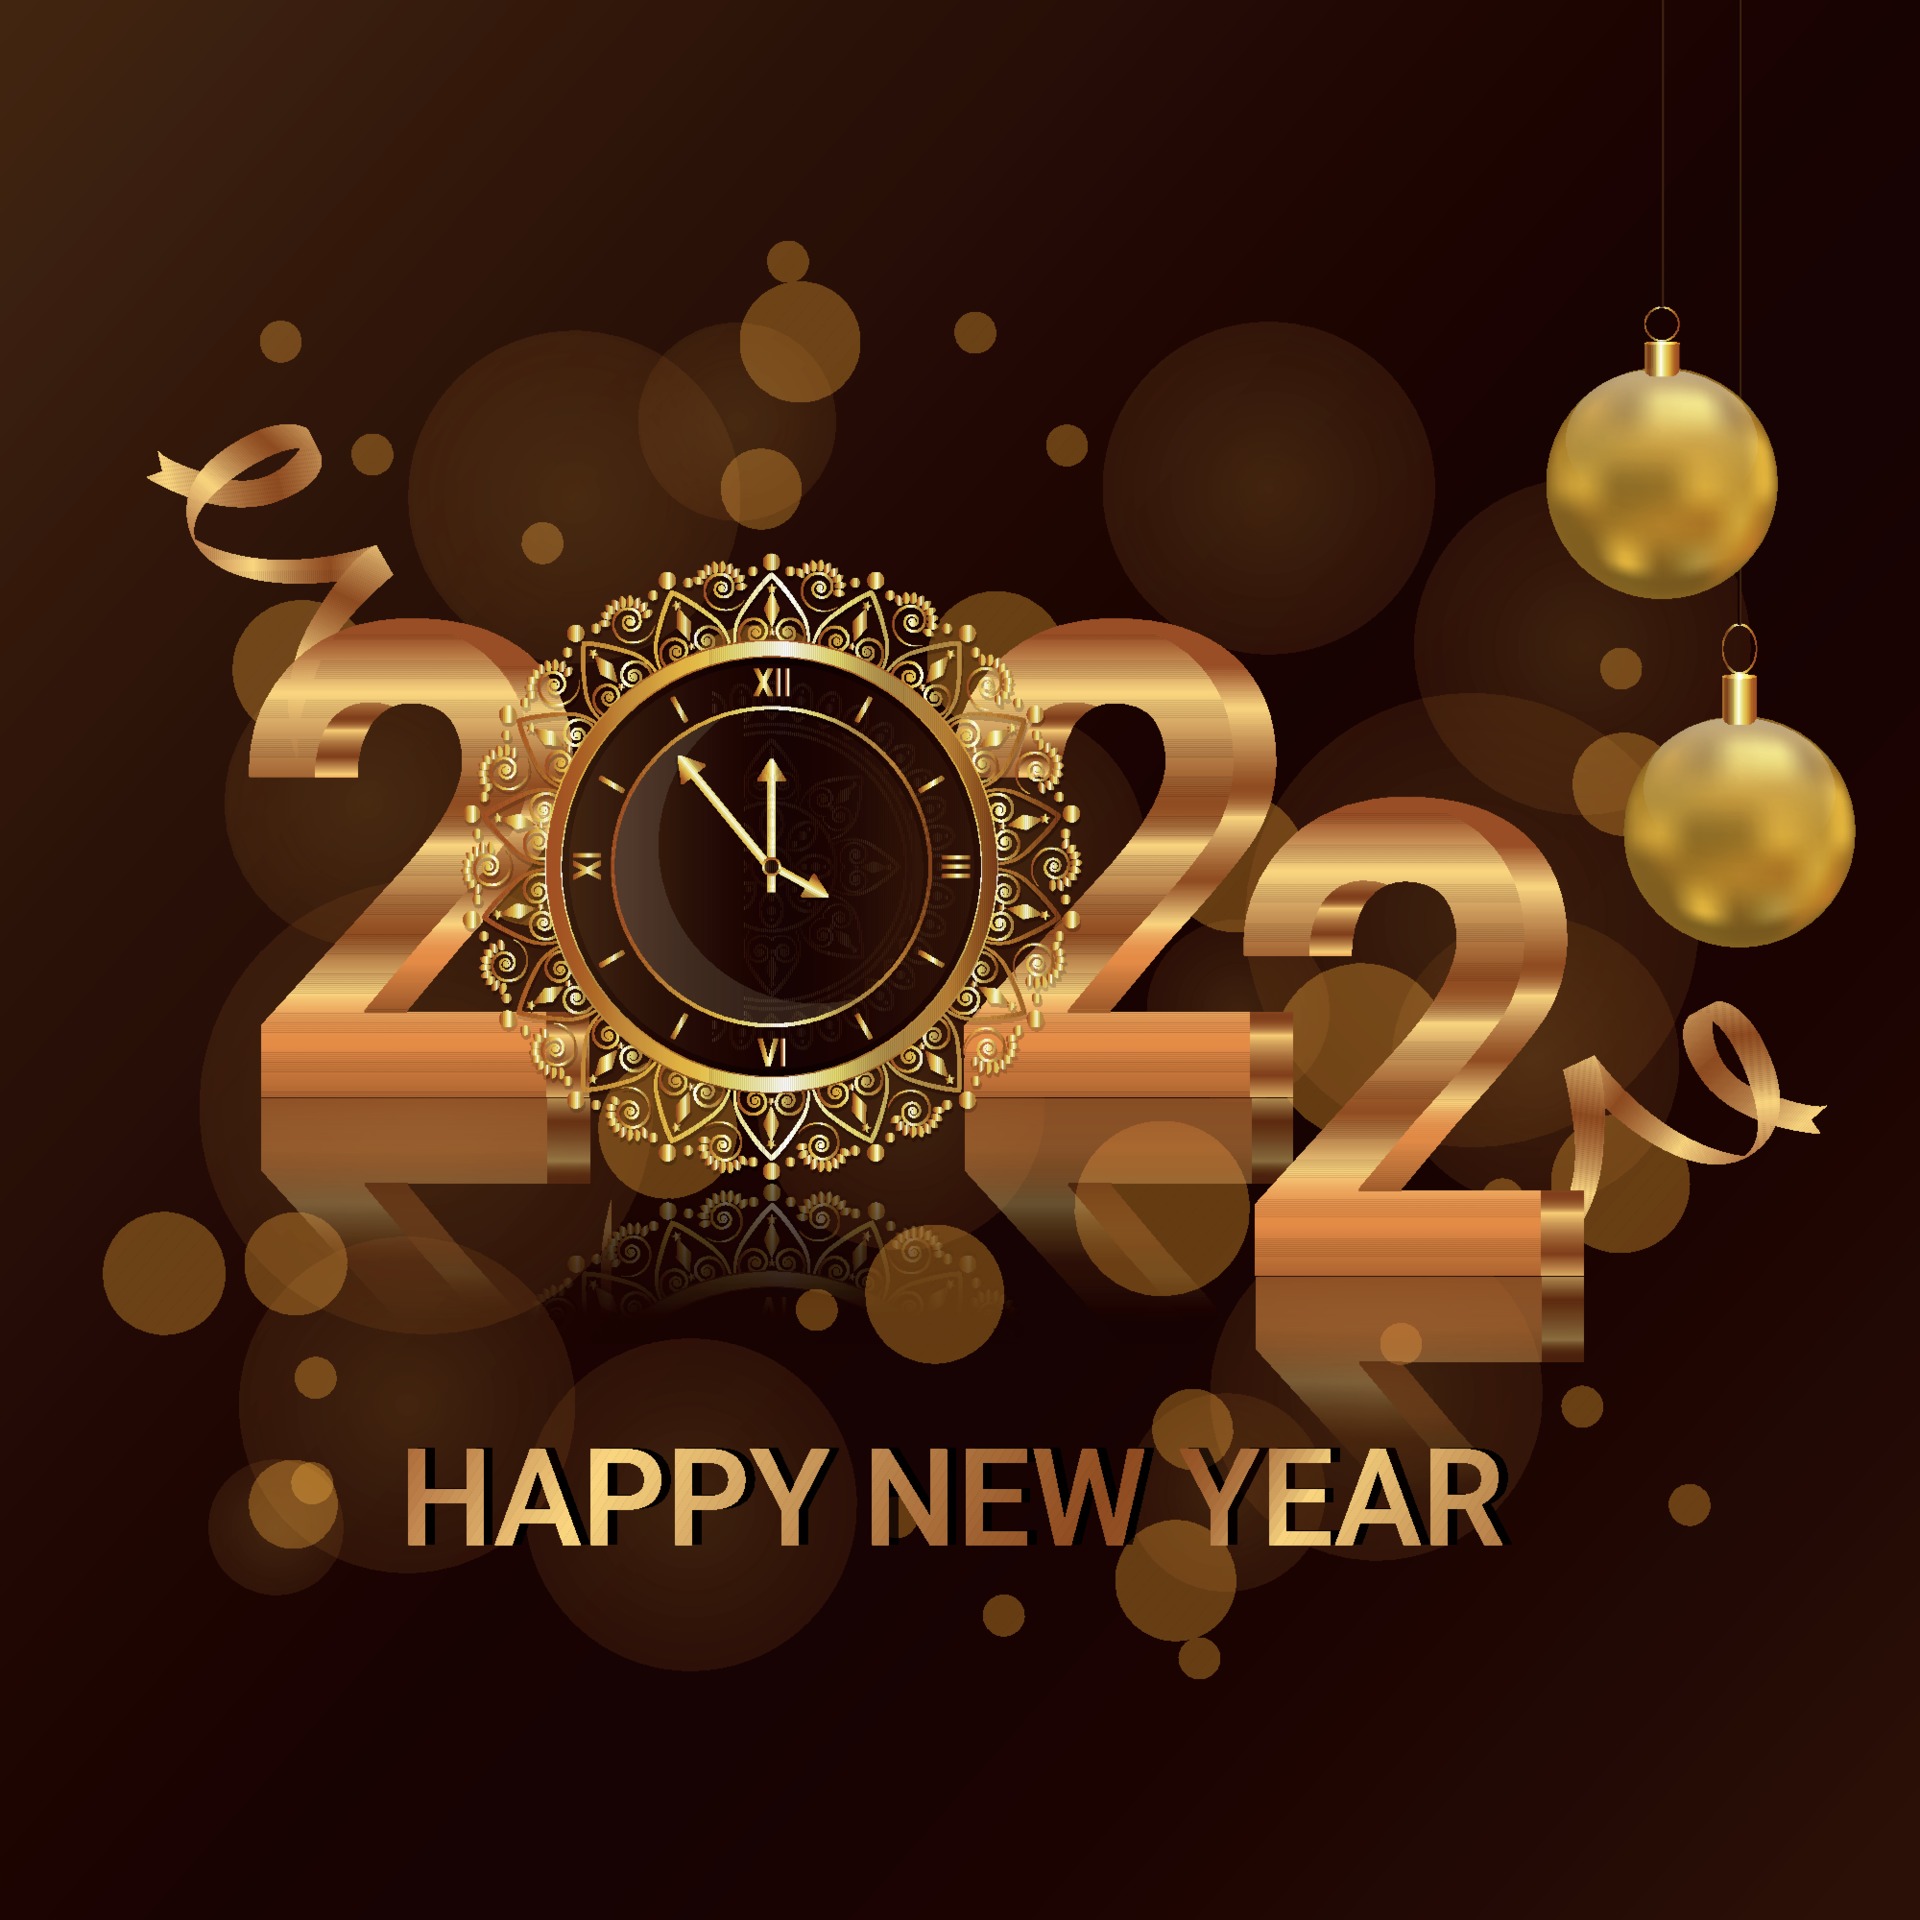 Happy New Year 2022 Invitation Greeting Card With Creative Vector Party Balls 2290410 Vector Art